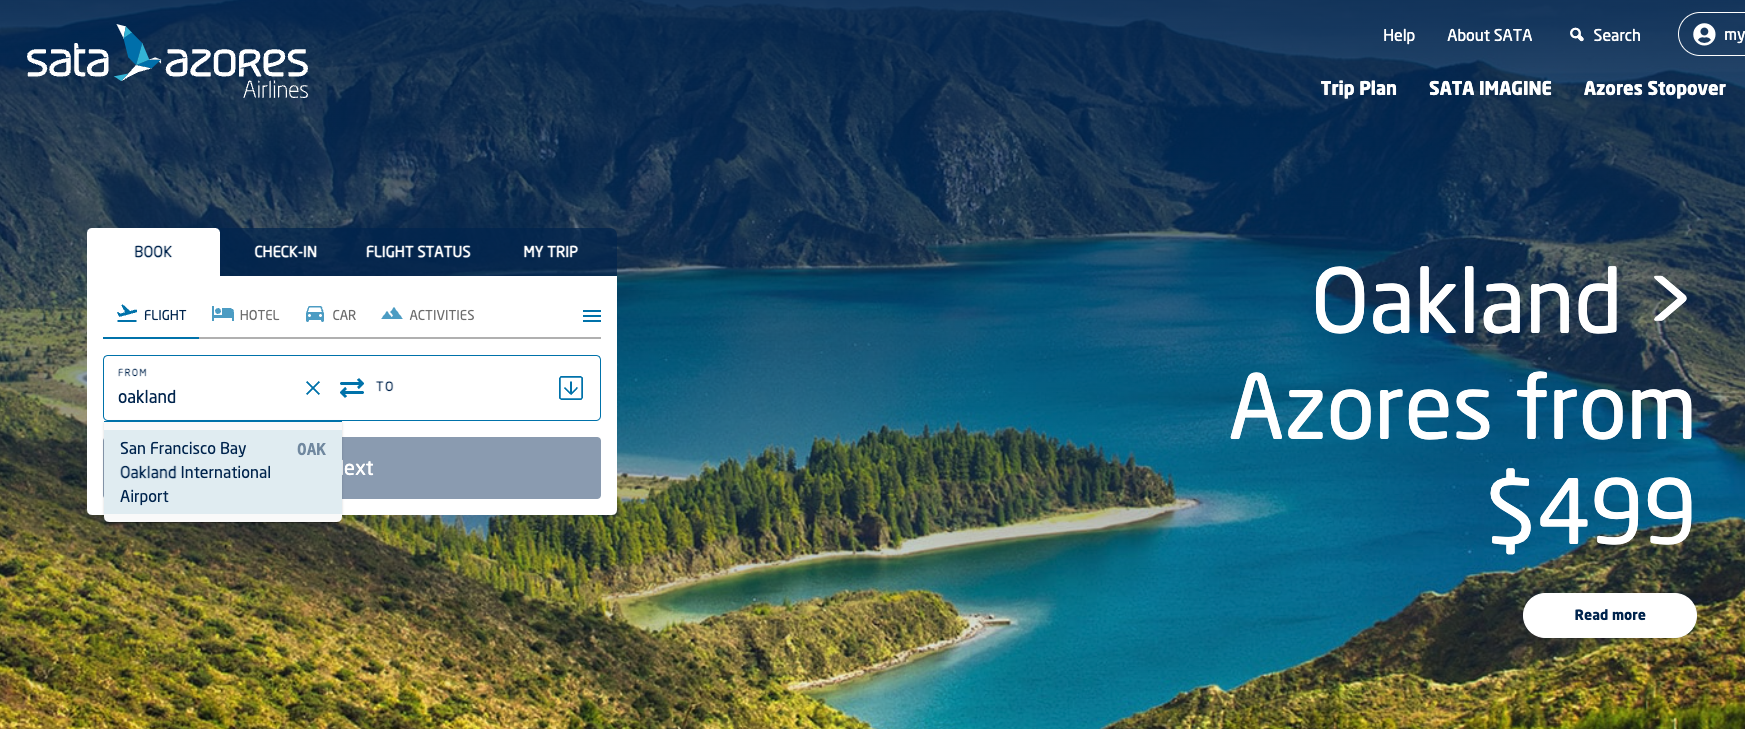 The image shows an airline's booking webpage with a scenic backdrop and a promotional offer from Oakland to Azores.